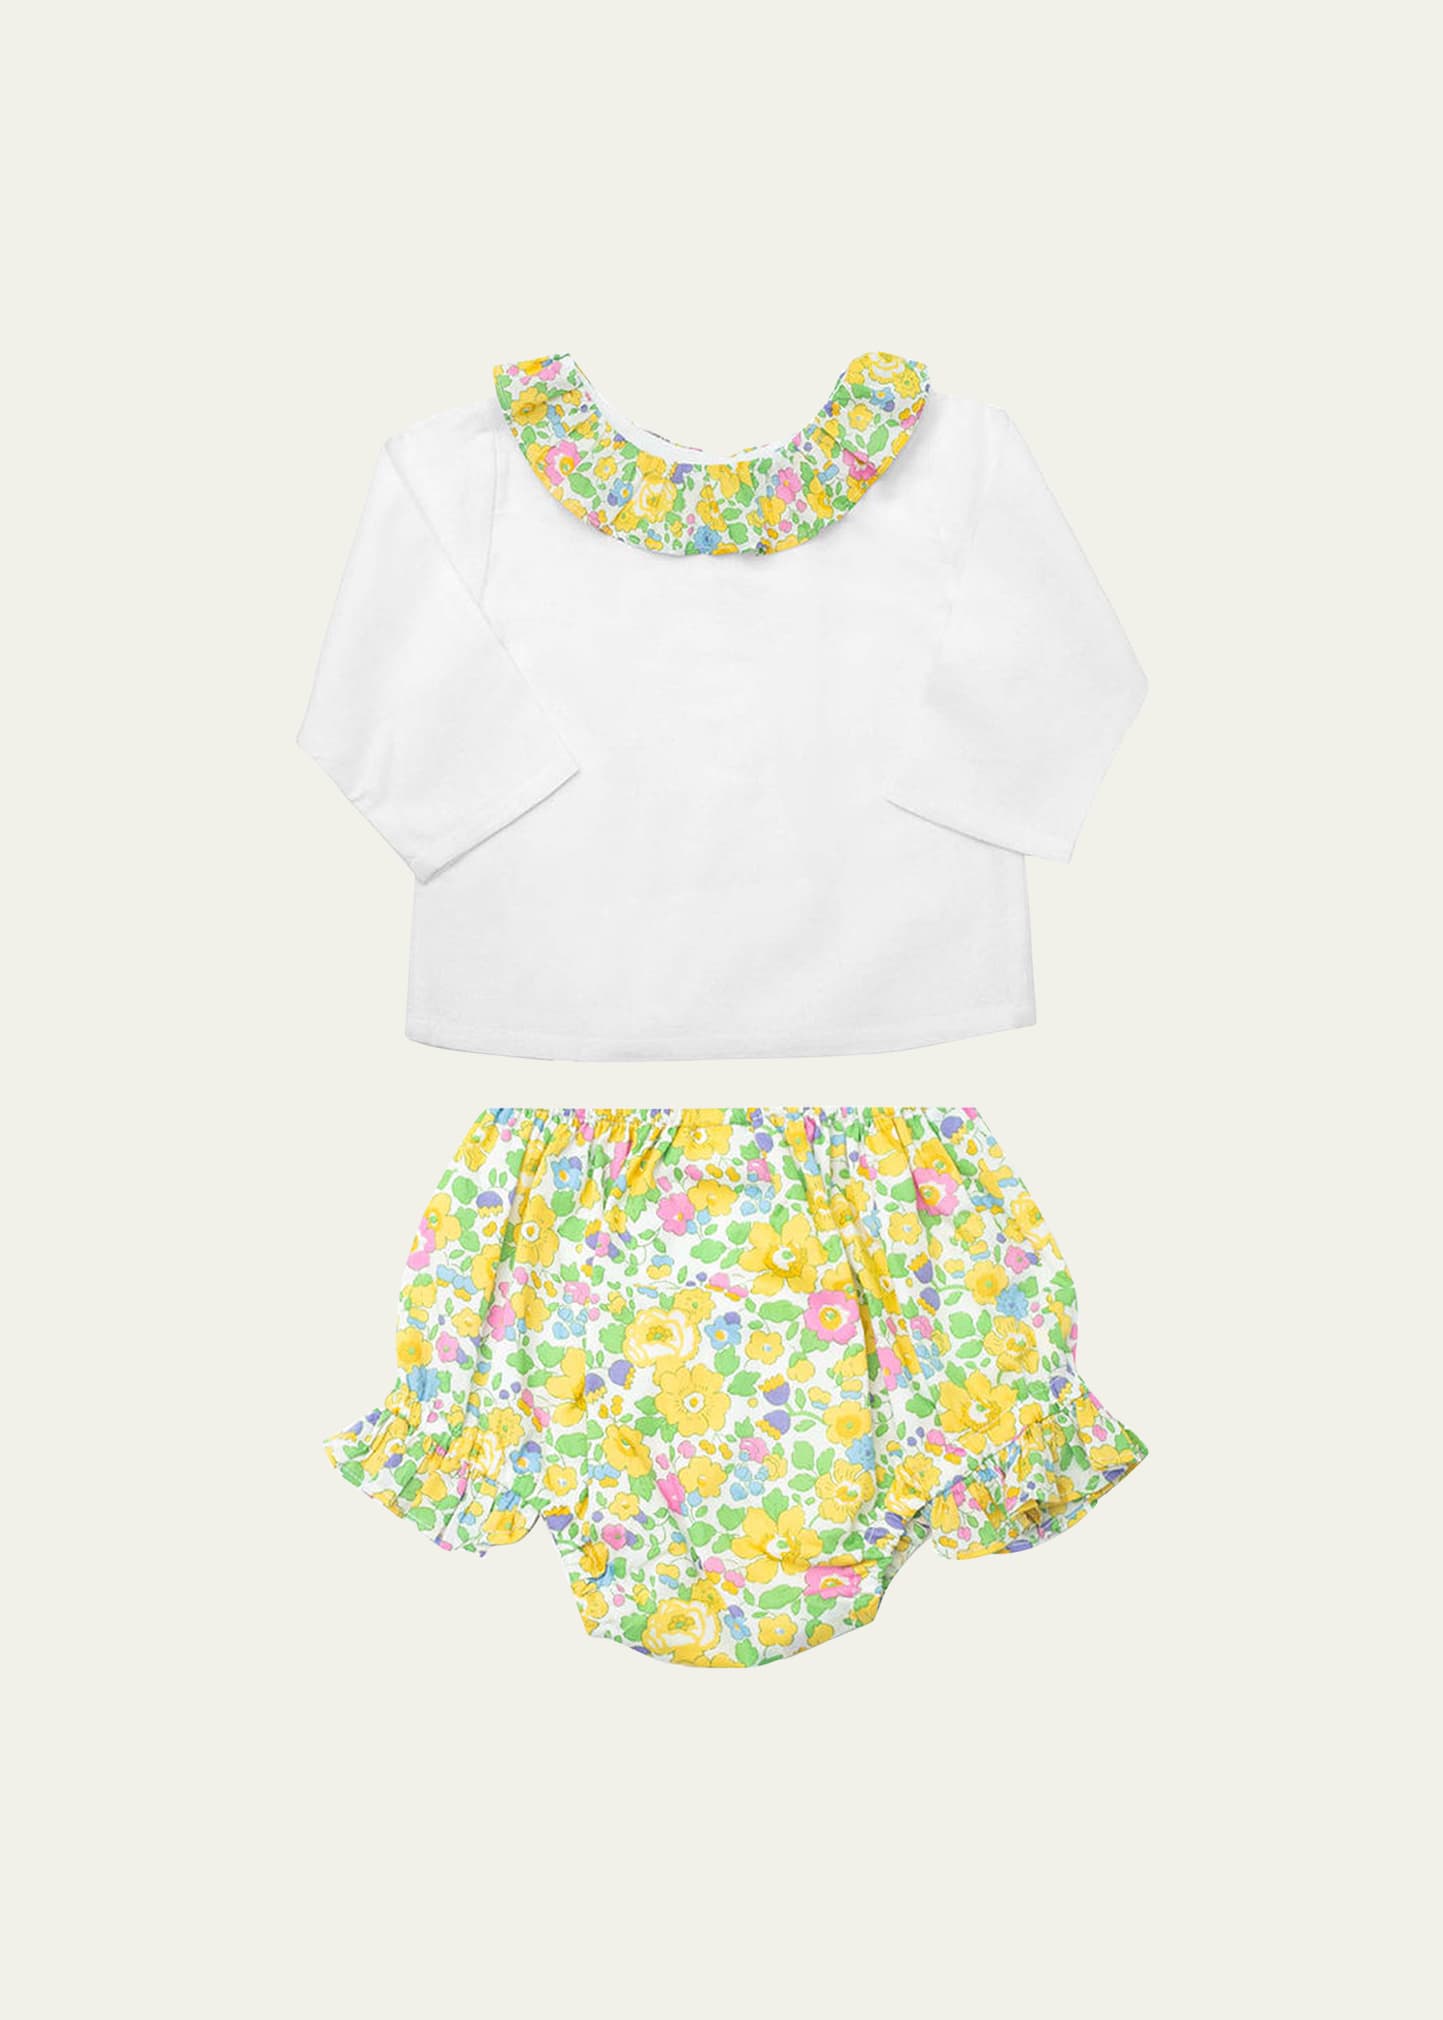 LOUELLE GIRL'S BETSY BLOUSE W/ BLOOMERS SET